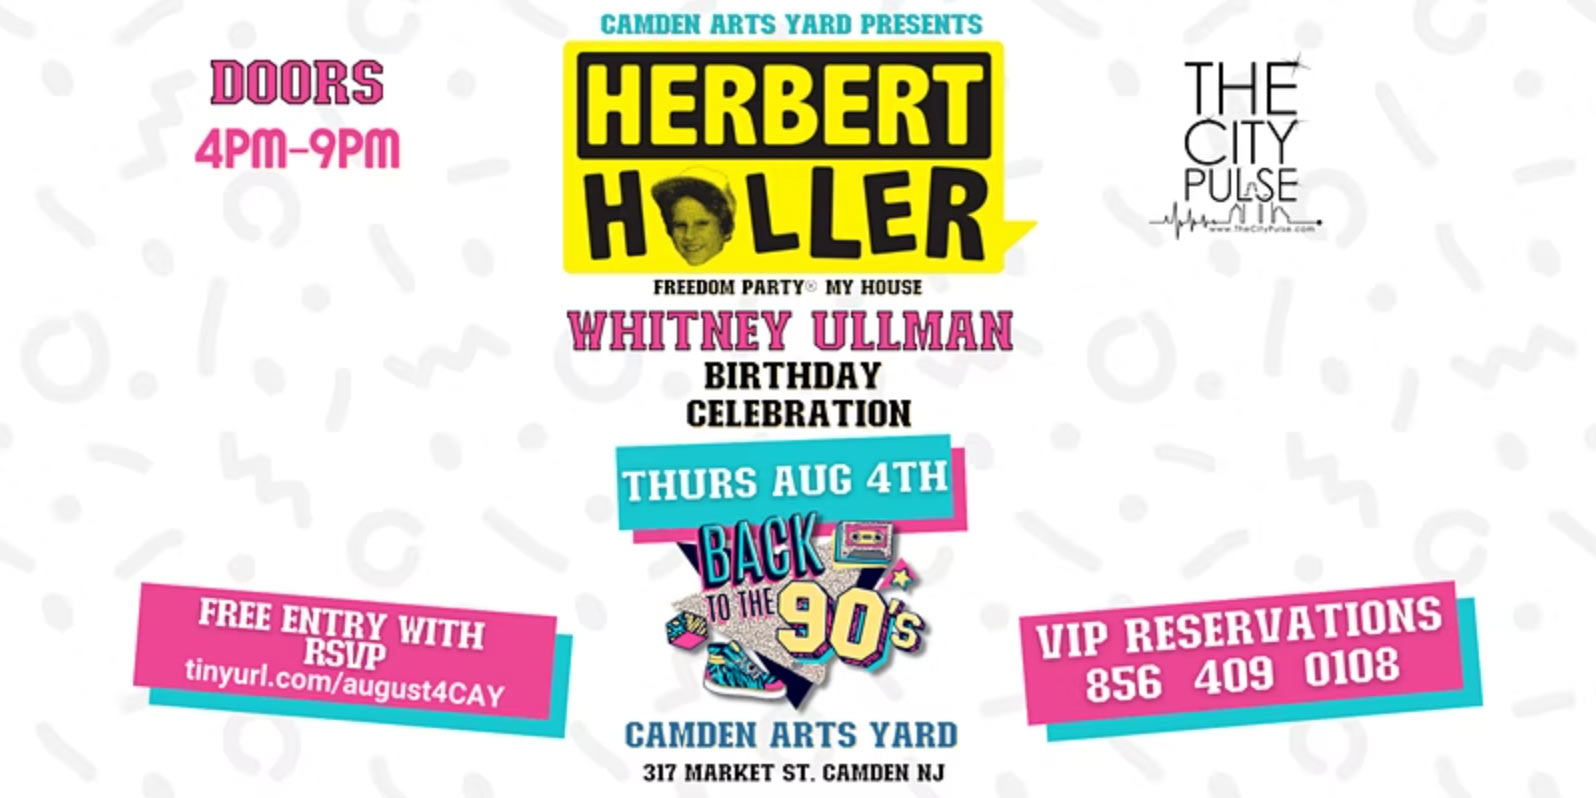 Back to the 90s Birthday Bash with Herbert Holler